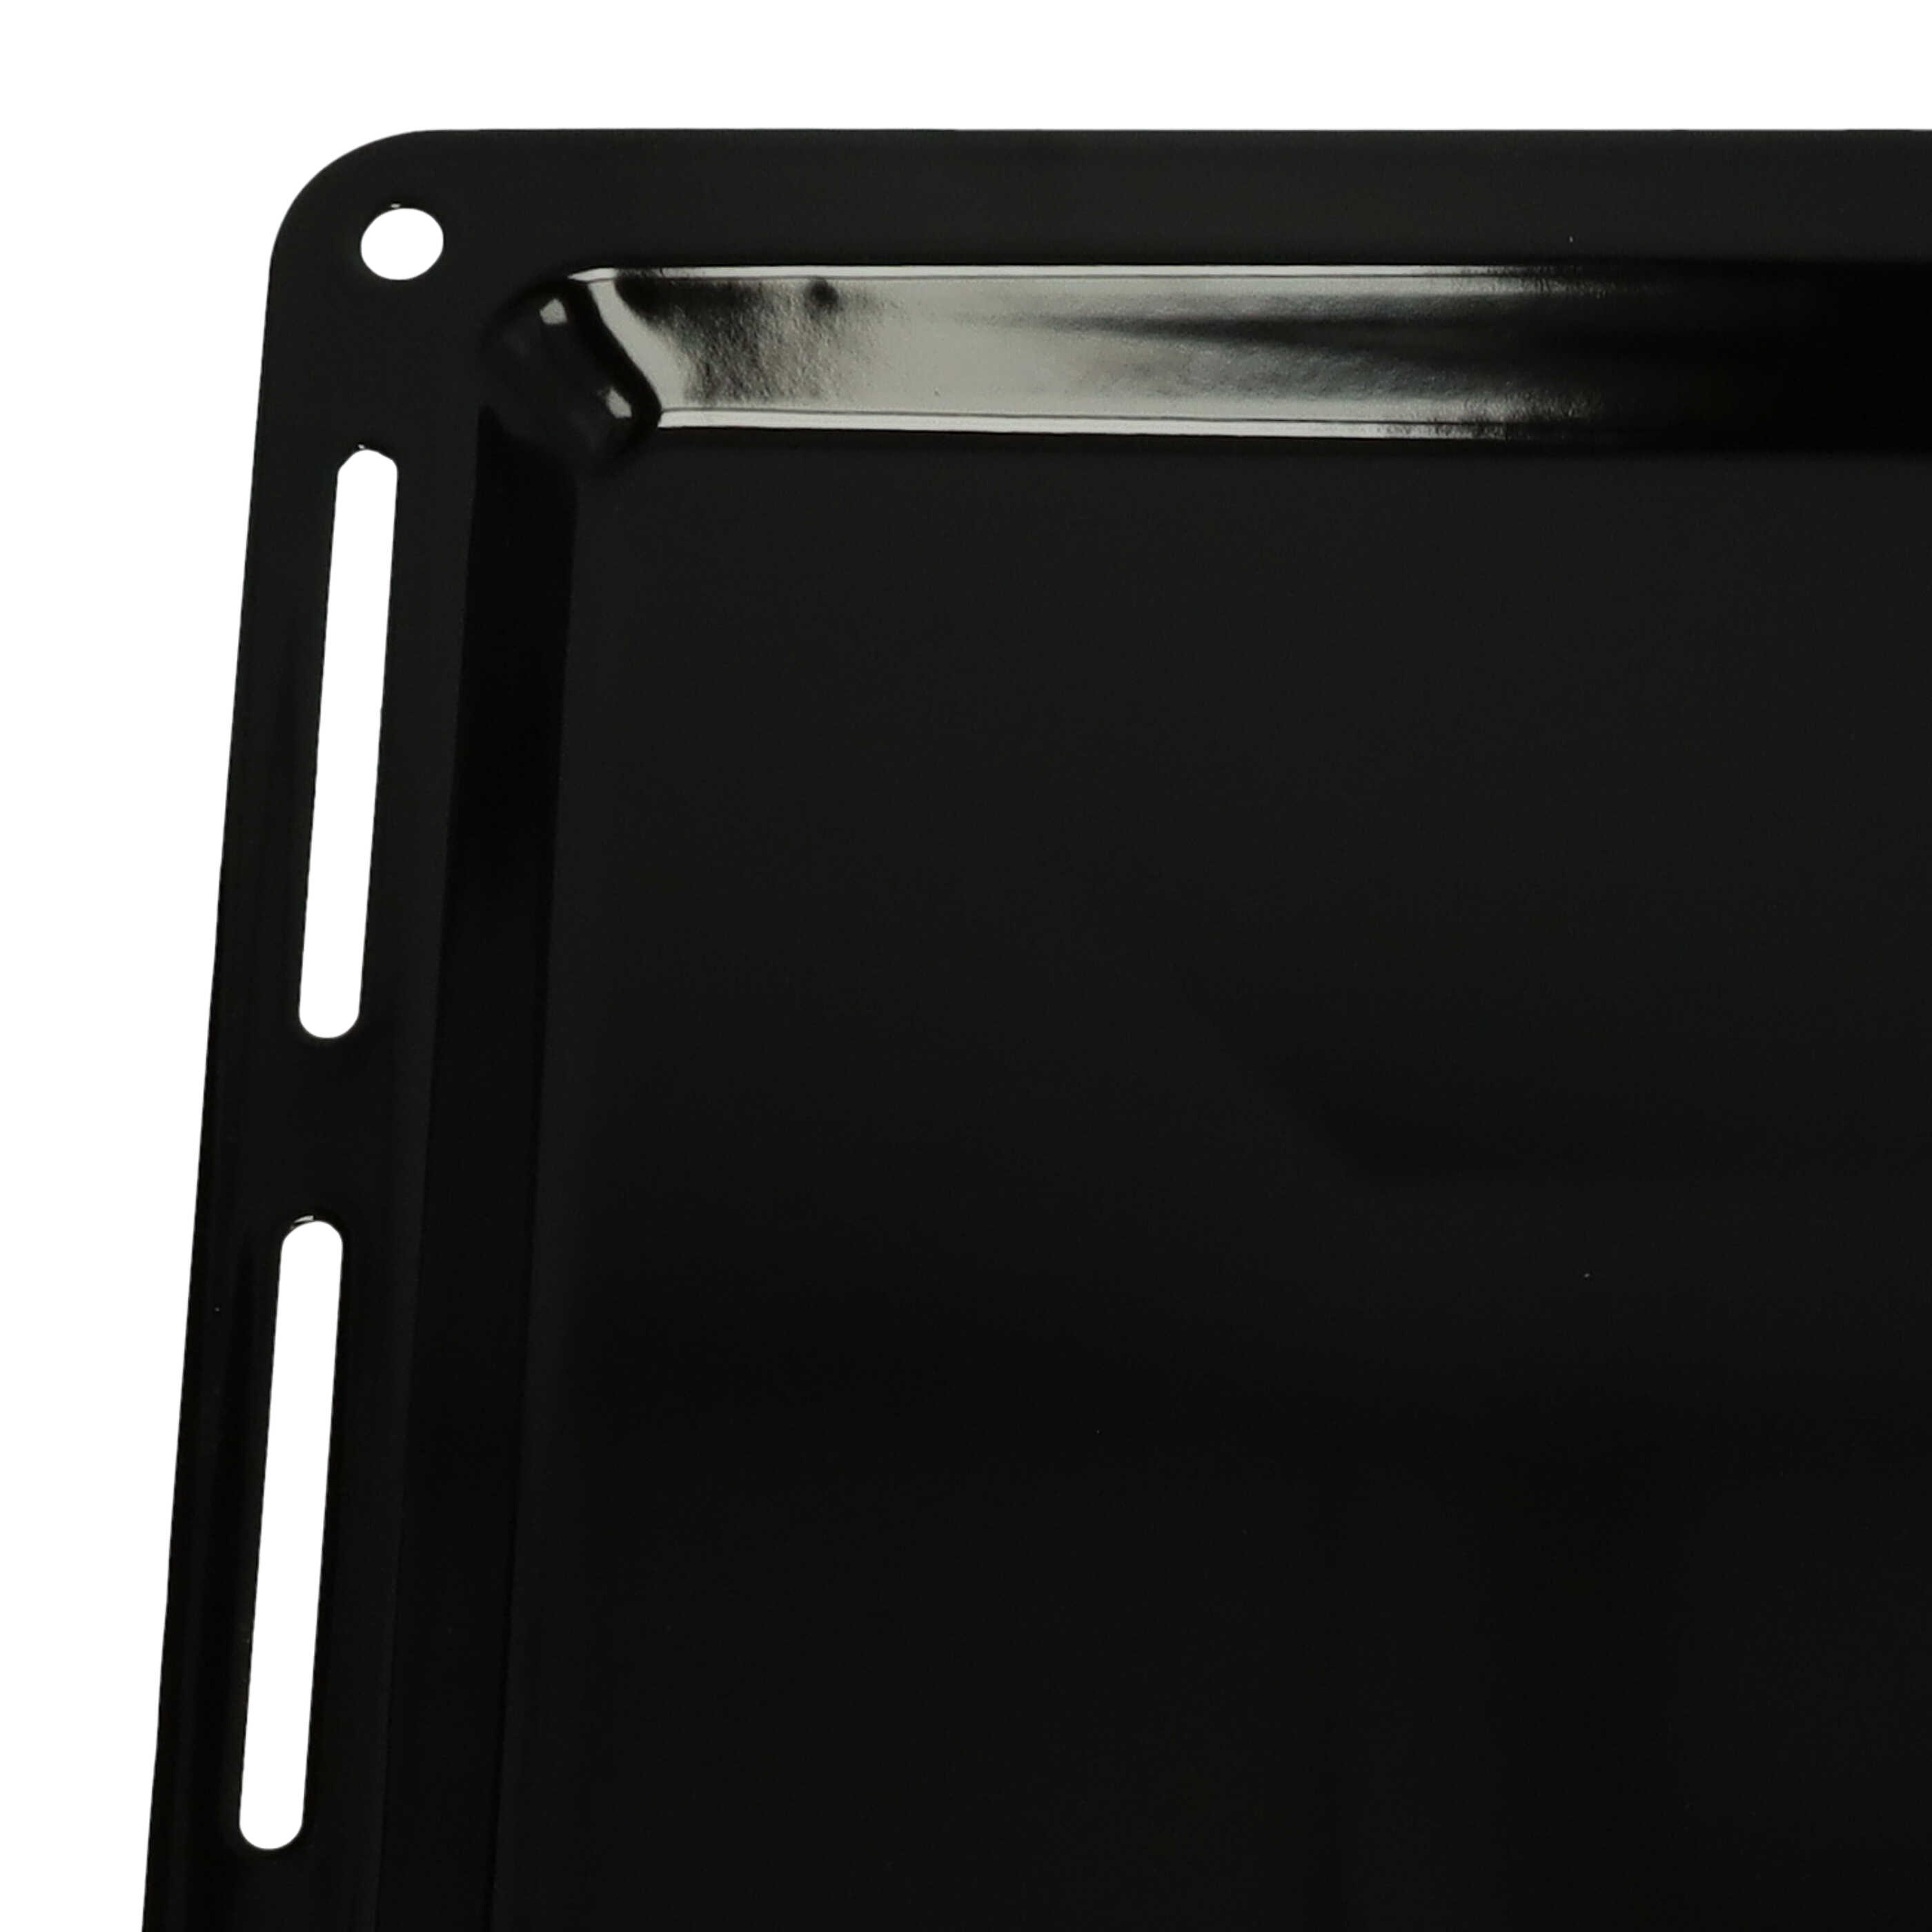 Baking Tray as Replacement for Indesit C00325793, ARI325934, C00325934 Oven - 44.5 x 37.5 x 2.5 cm